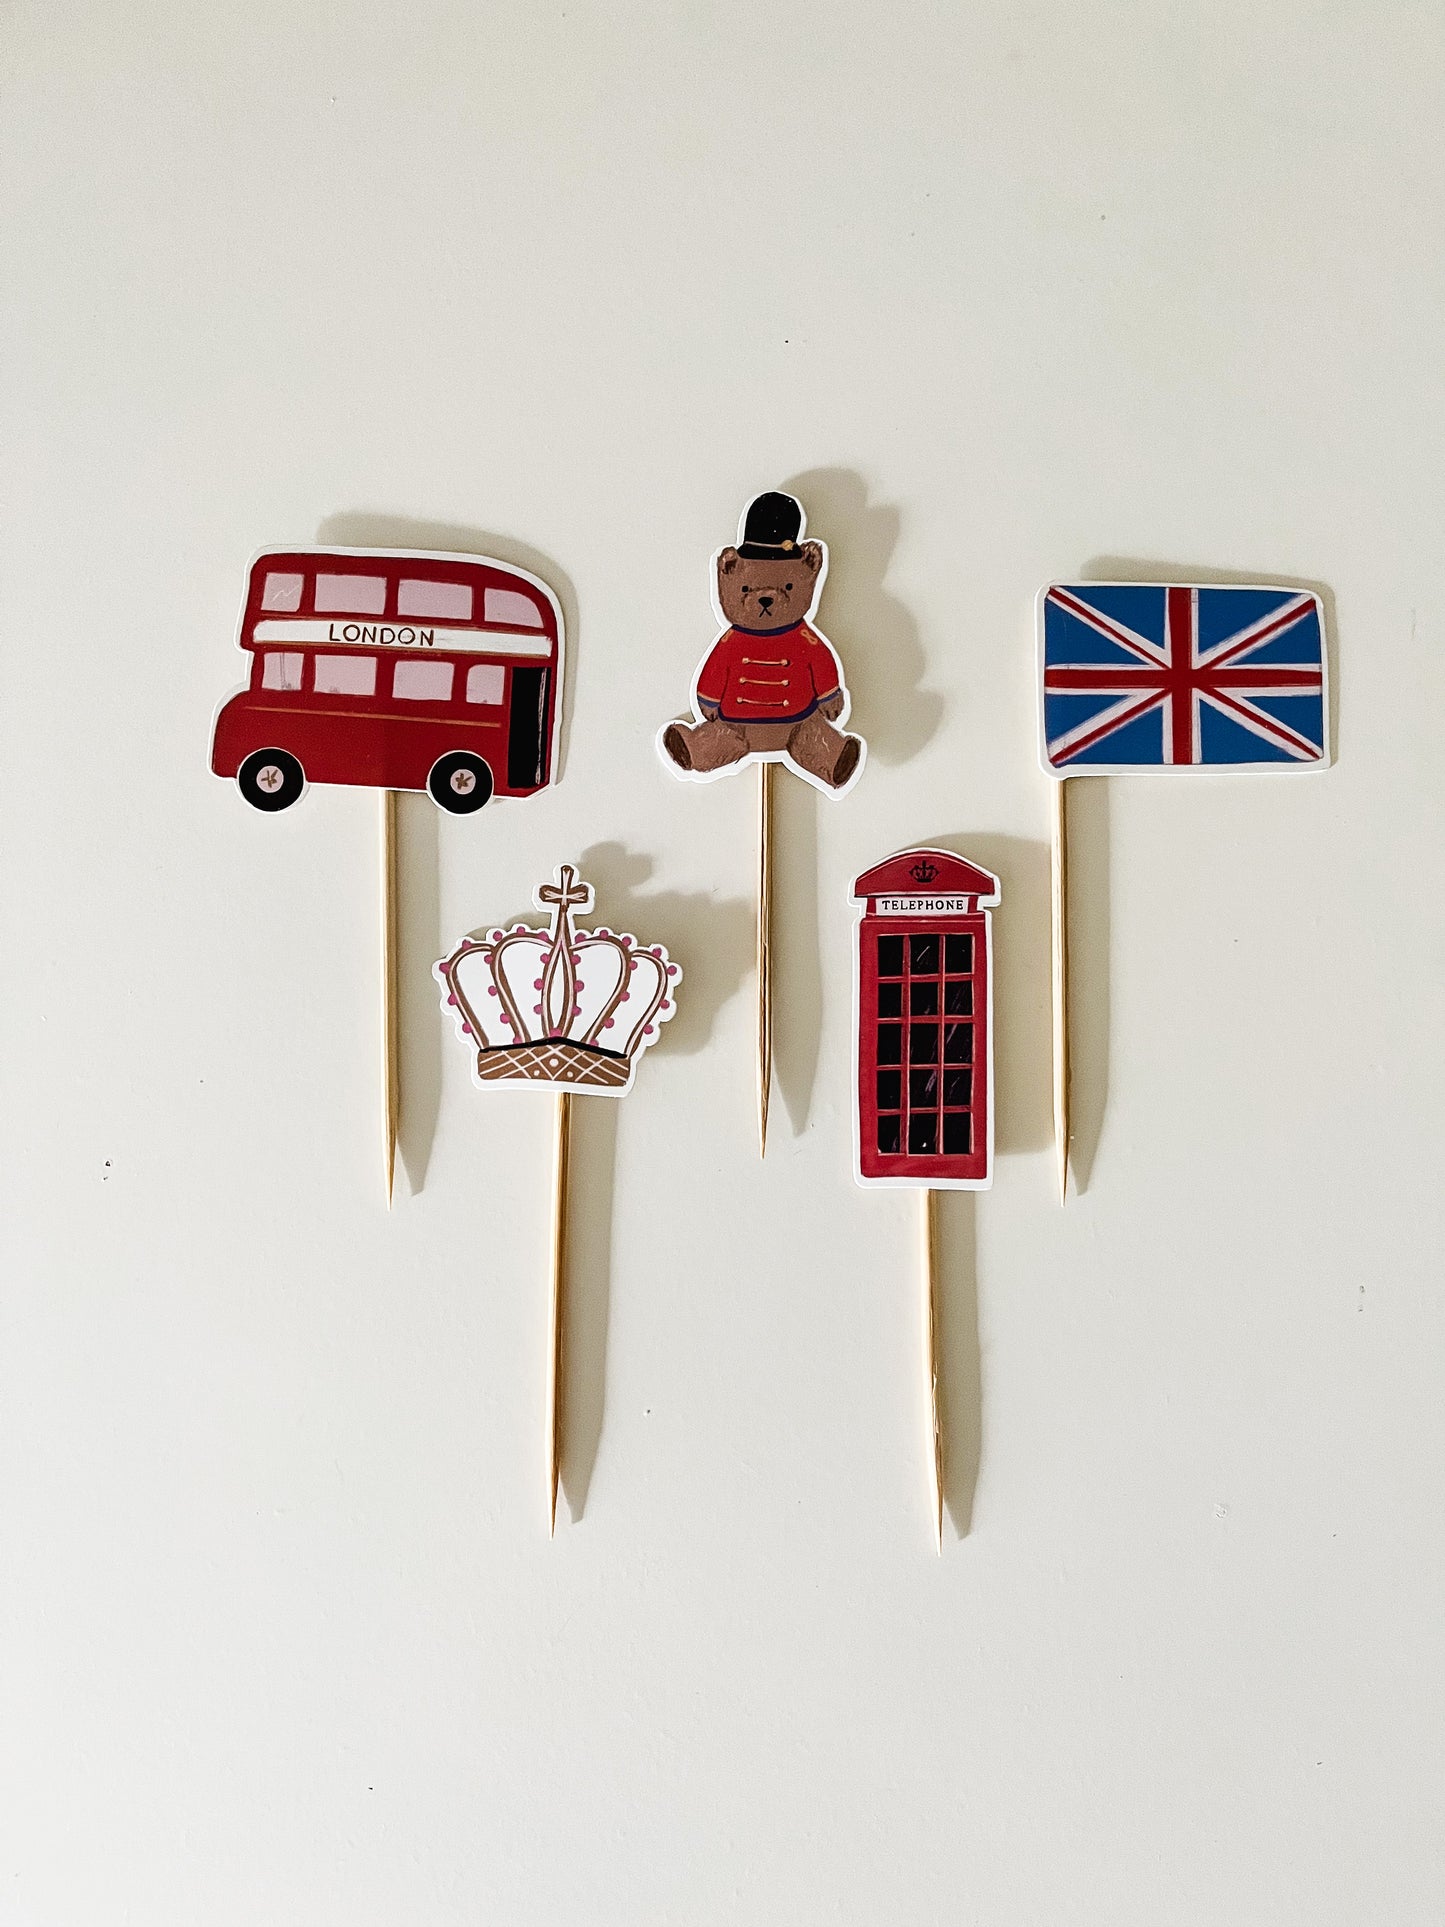 London Cupcake Toppers